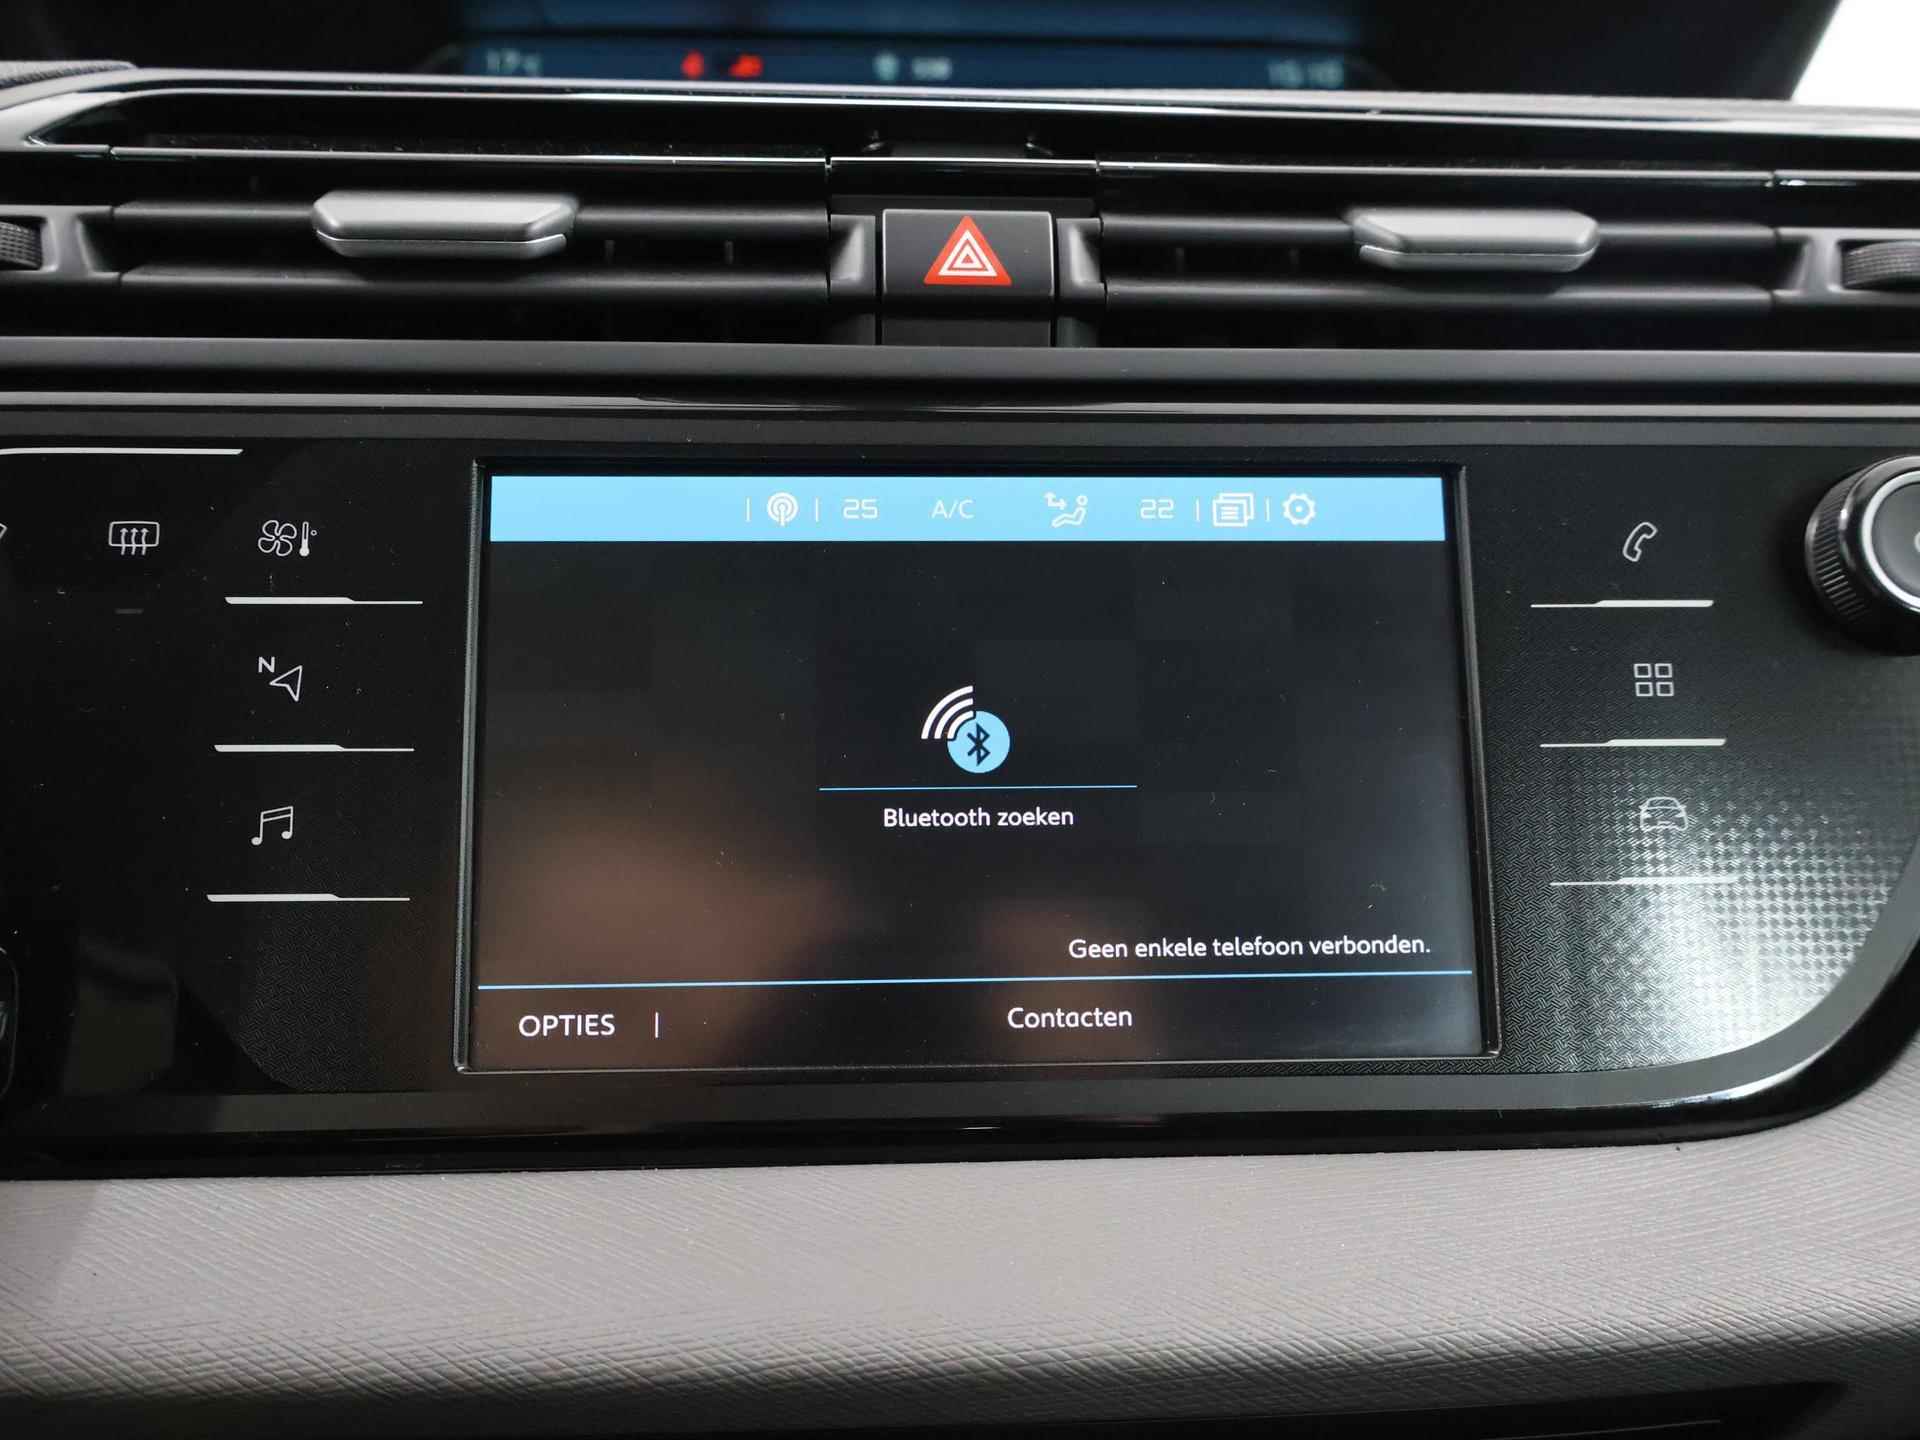 Citroen Grand C4 SpaceTourer 1.2 PureTech Business | 7 Persoons | Automaat | Navigatiesysteem | Achteruitrijcamera | Cruise Control | Climate Control | Apple Carplay/Android Auto | - 18/36